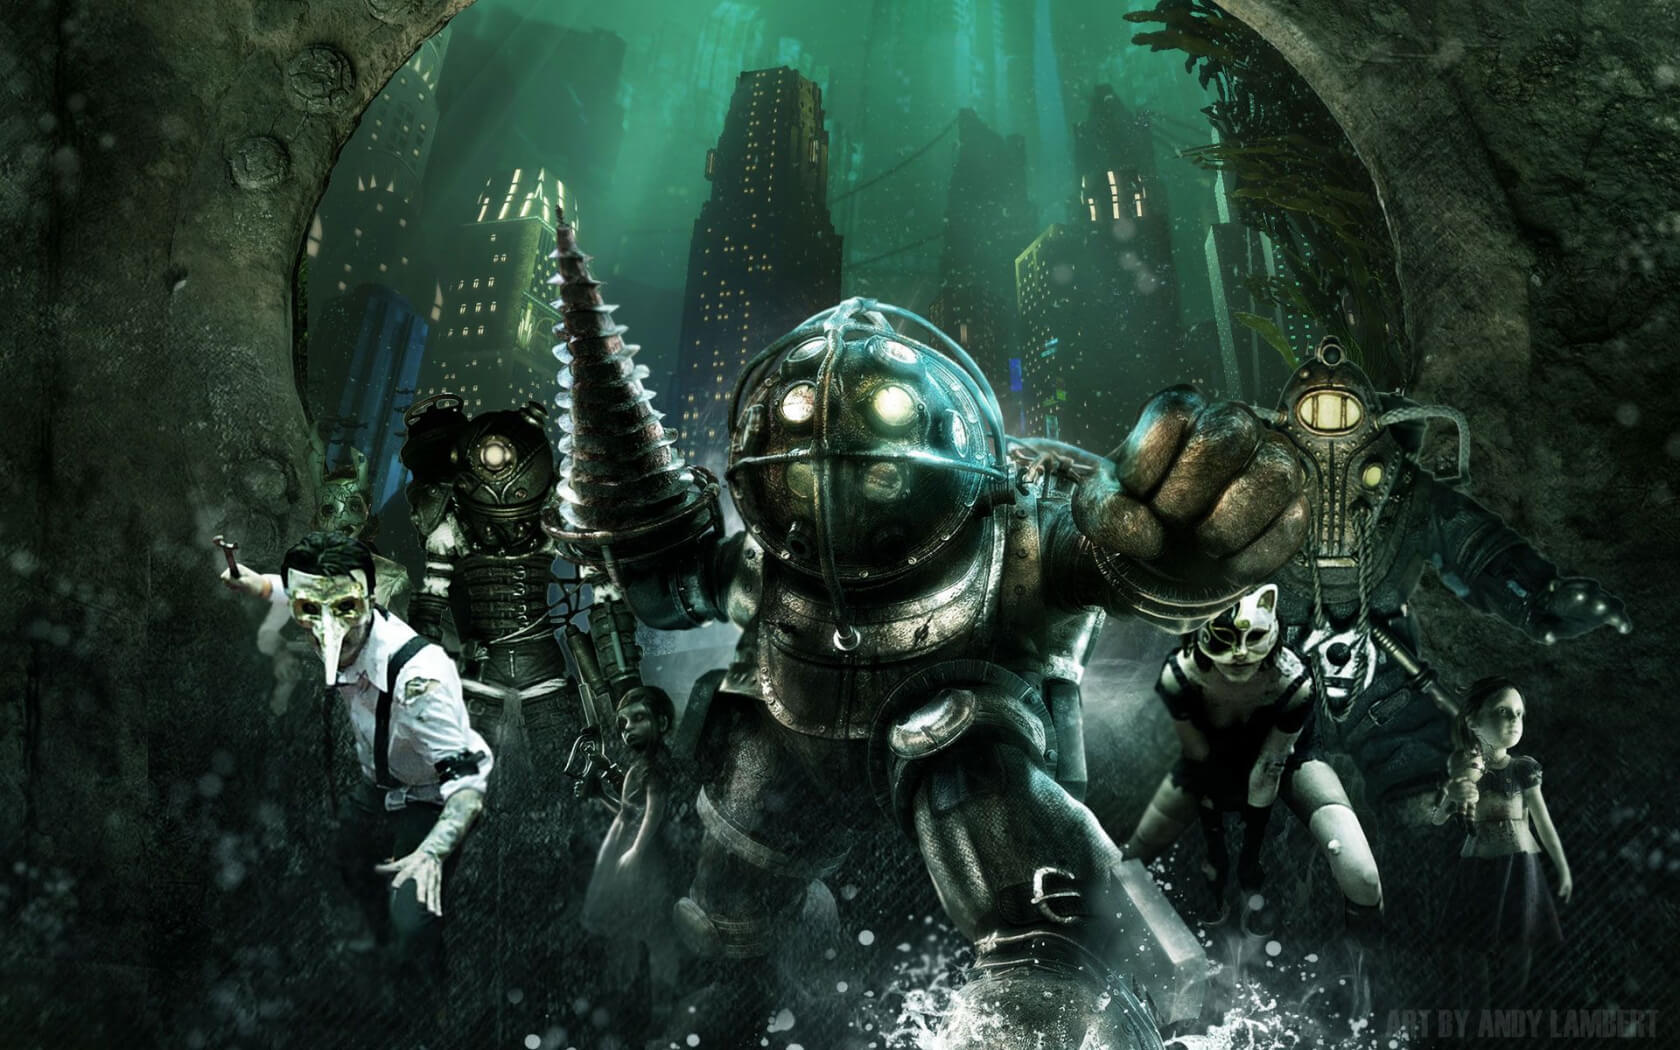 BioShock is celebrating its 10-year anniversary with a $200 collector's edition